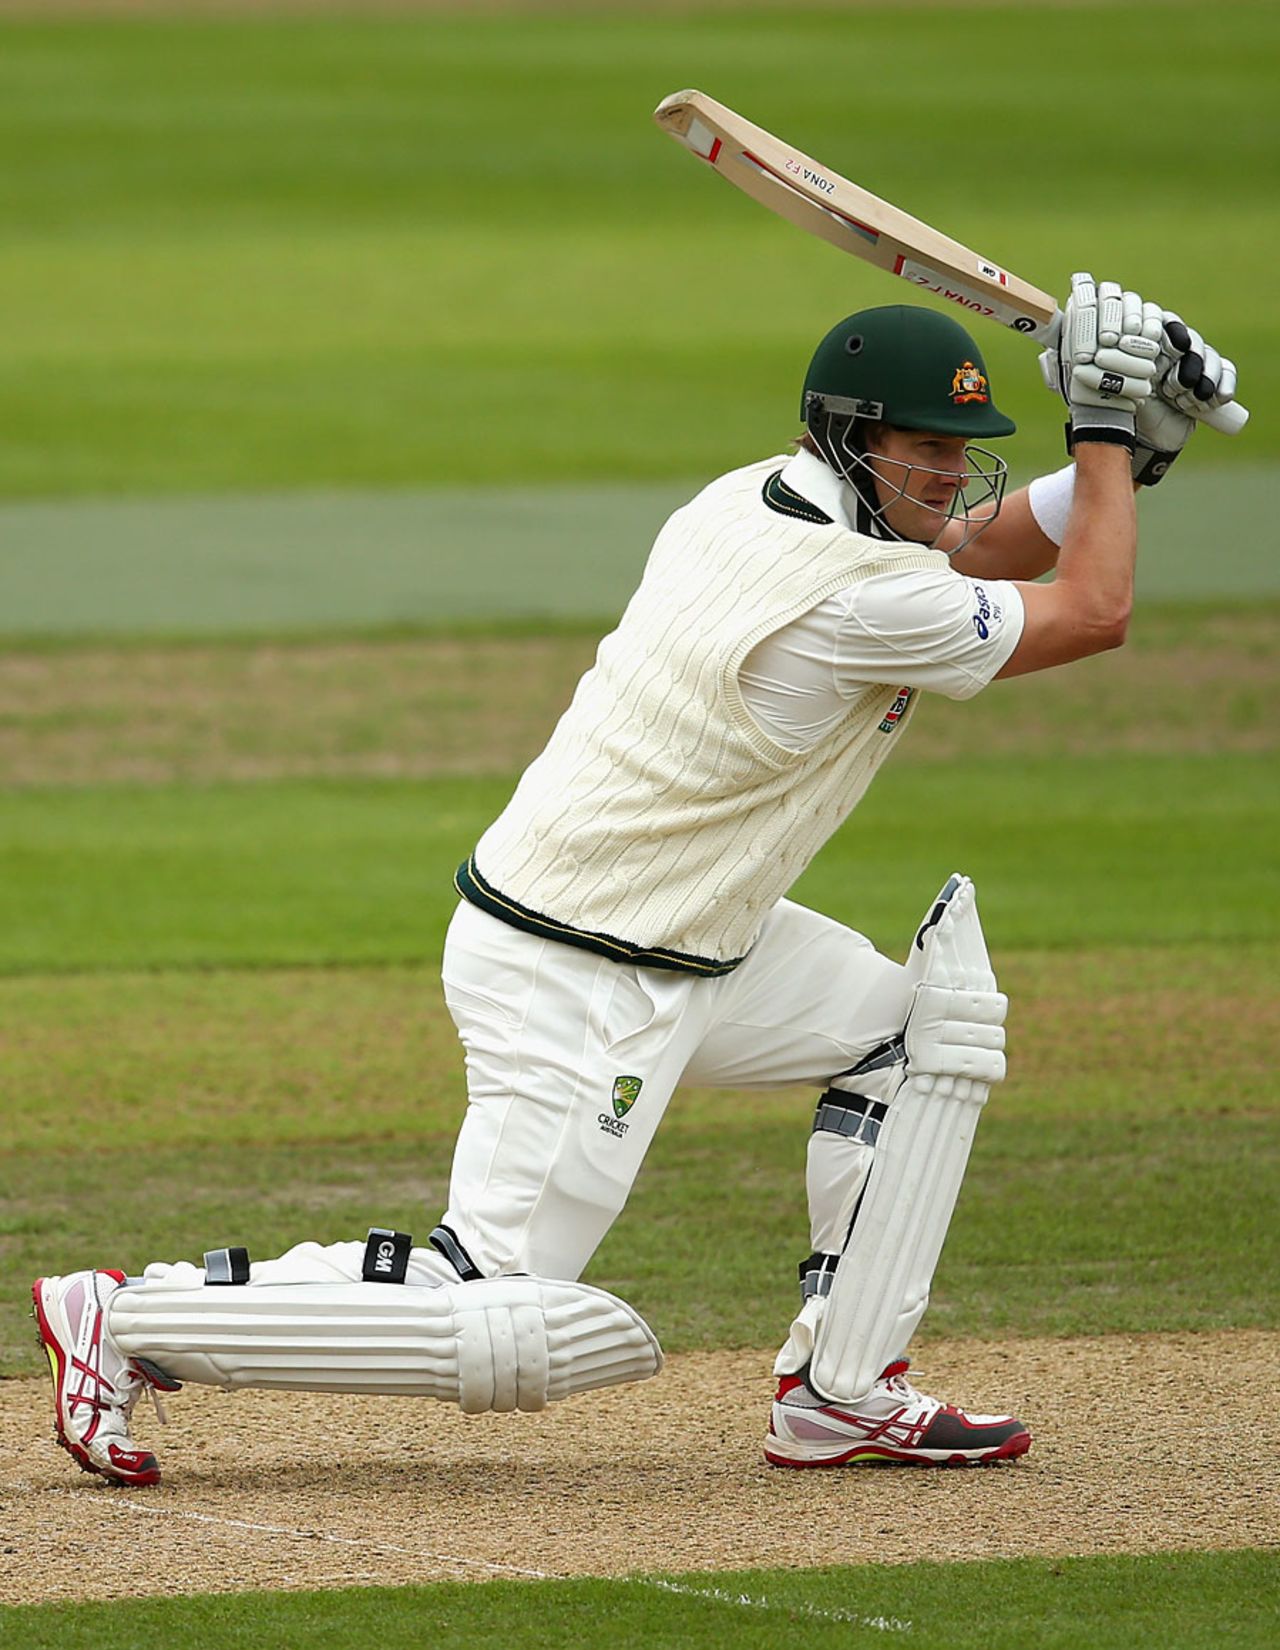 Shane Watson drives during his brisk start, Worcestershire v Australians, Tour Match, New Road, 1st day, July 2, 2013